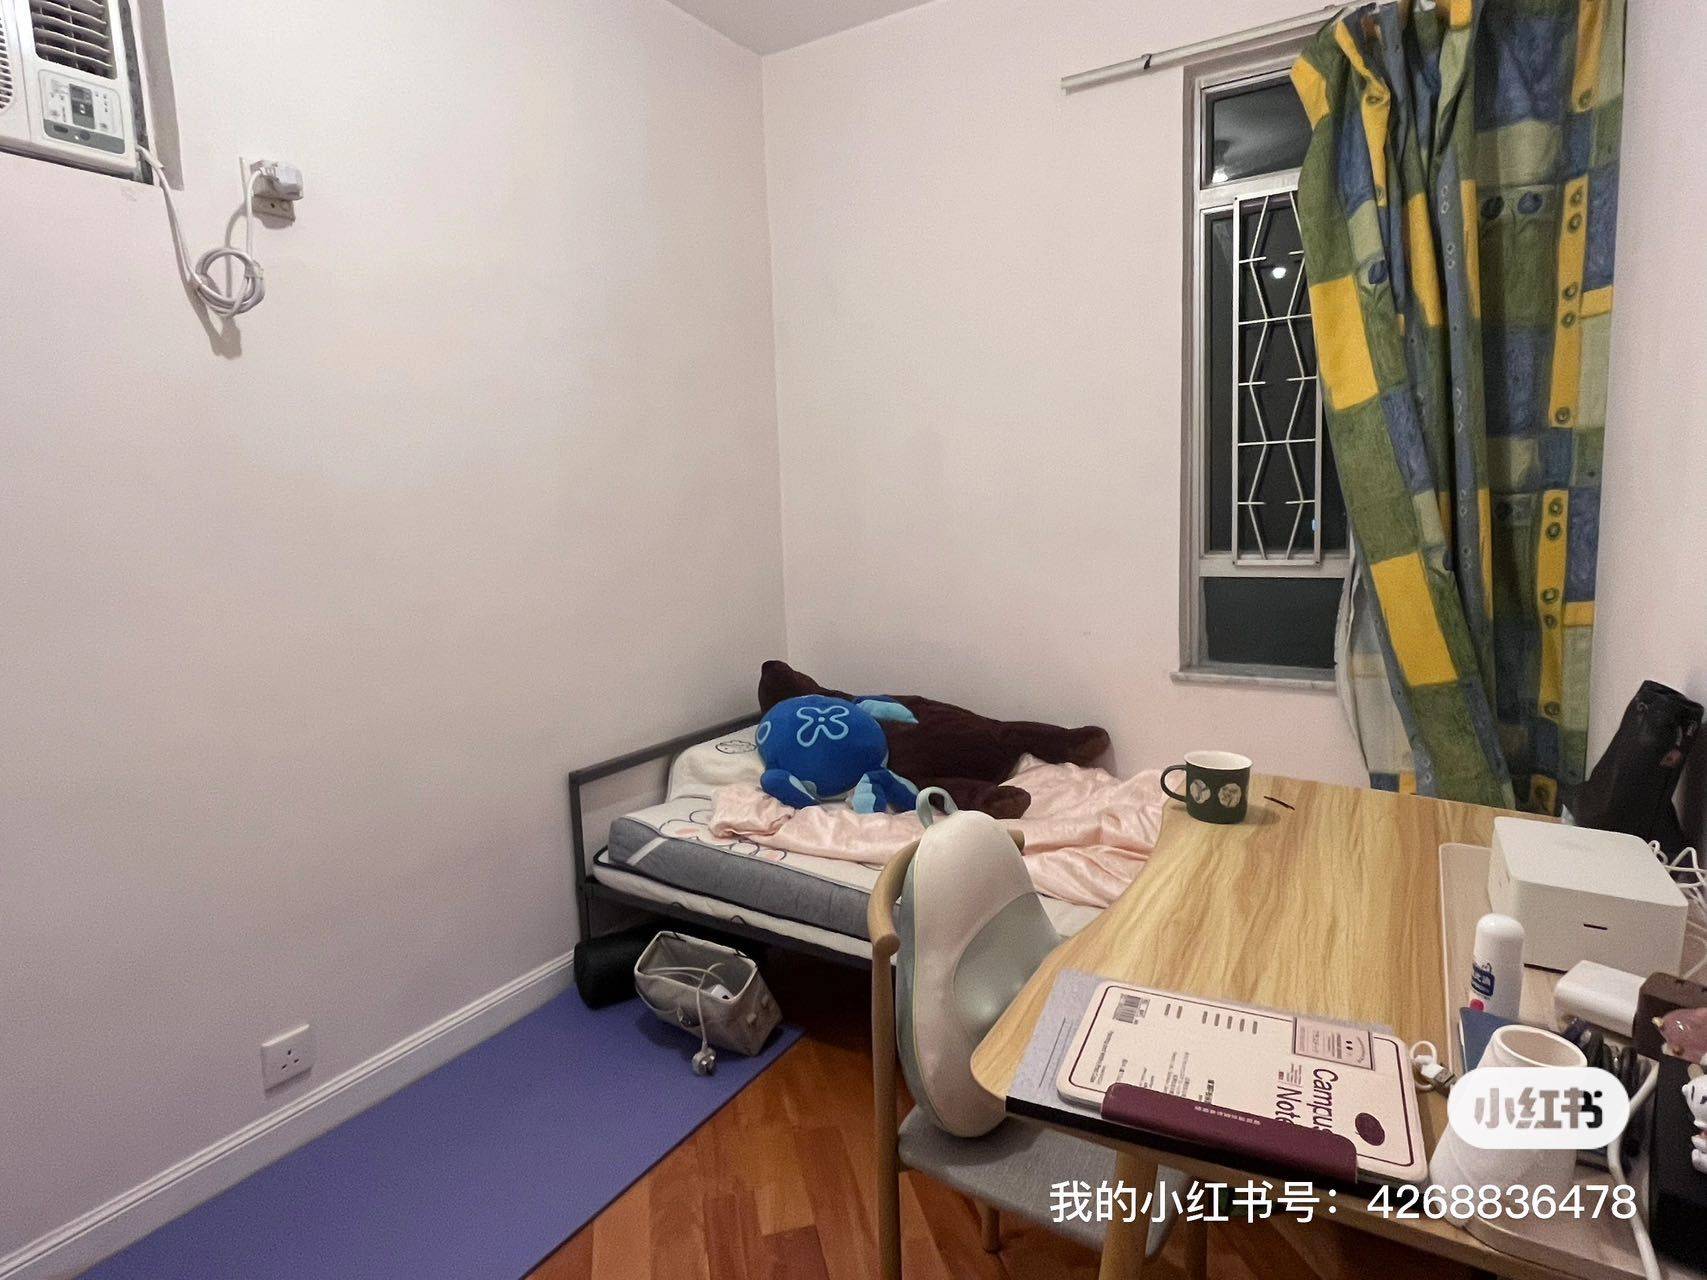 Hong Kong-New Territories-Cozy Home,Clean&Comfy,“Friends”,Chilled